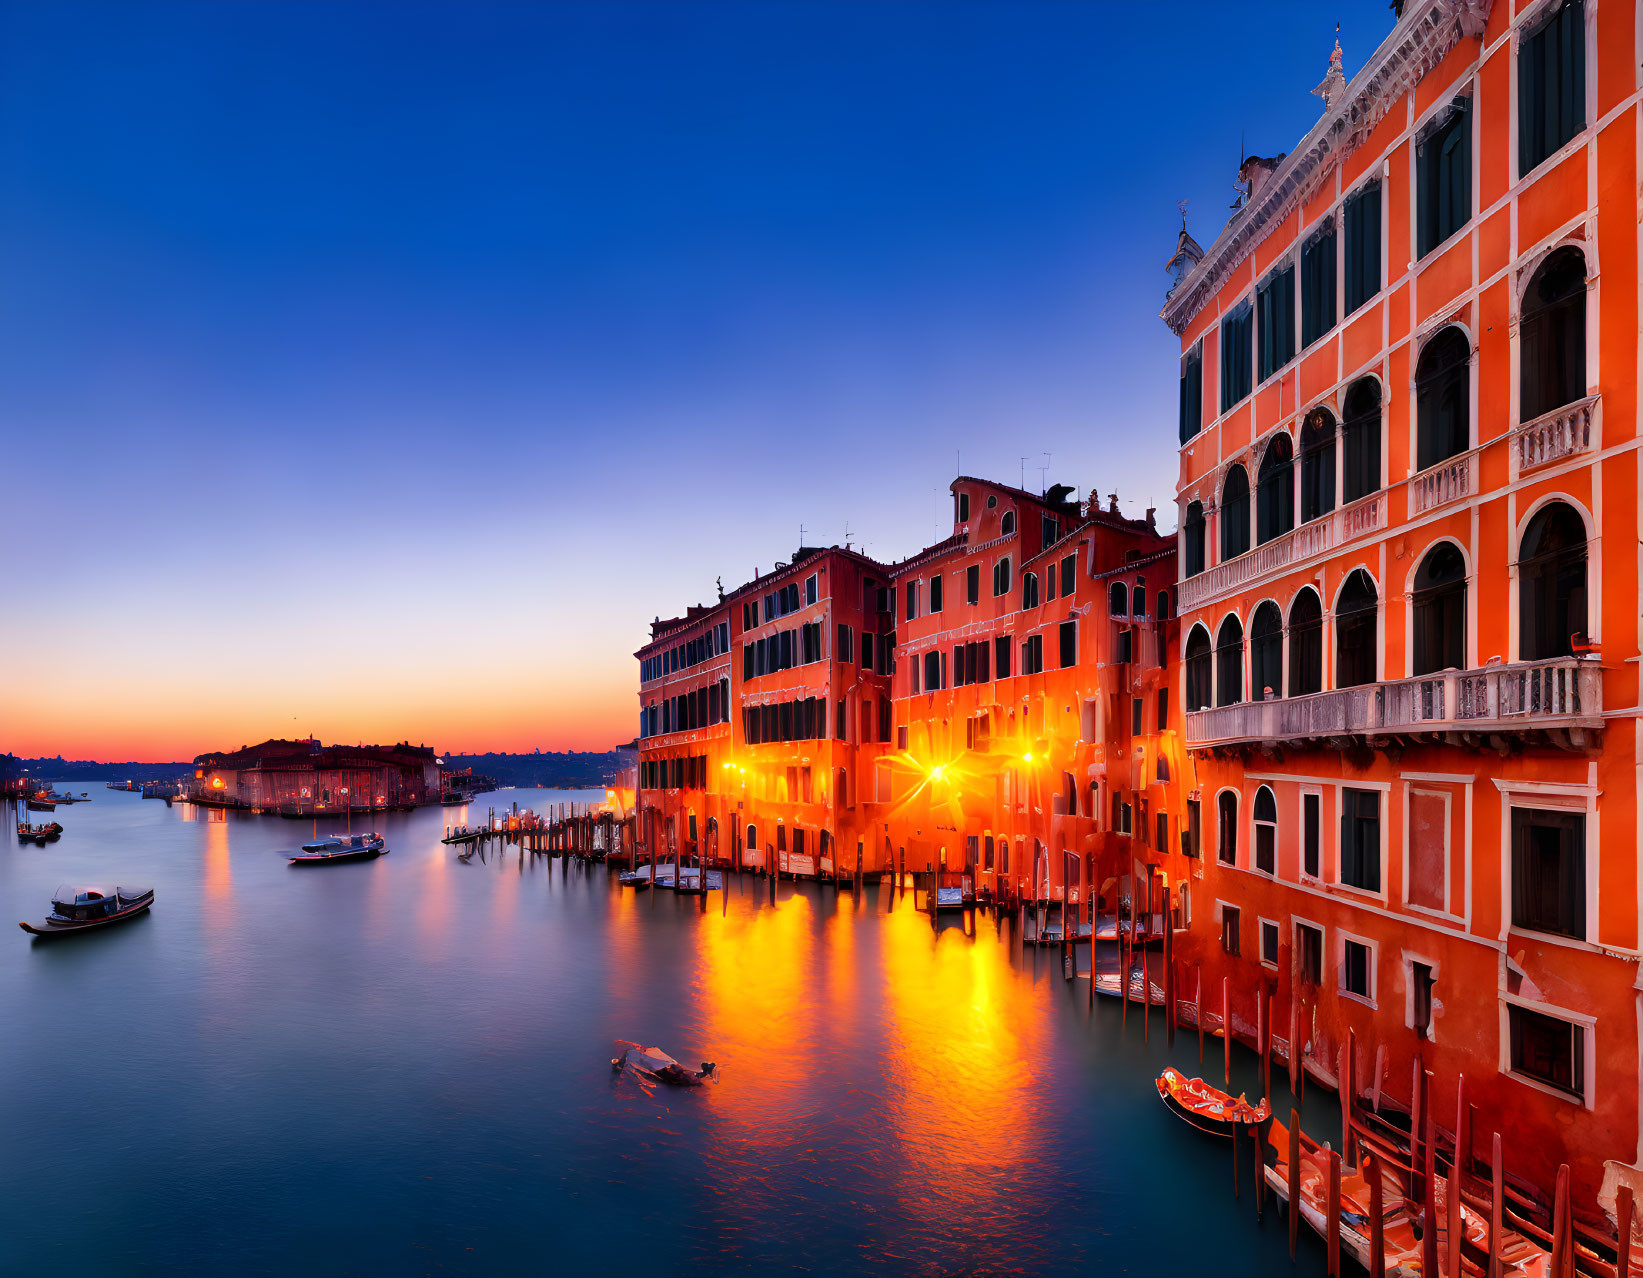 Illuminated Venetian canal at twilight with reflecting buildings and moored boats